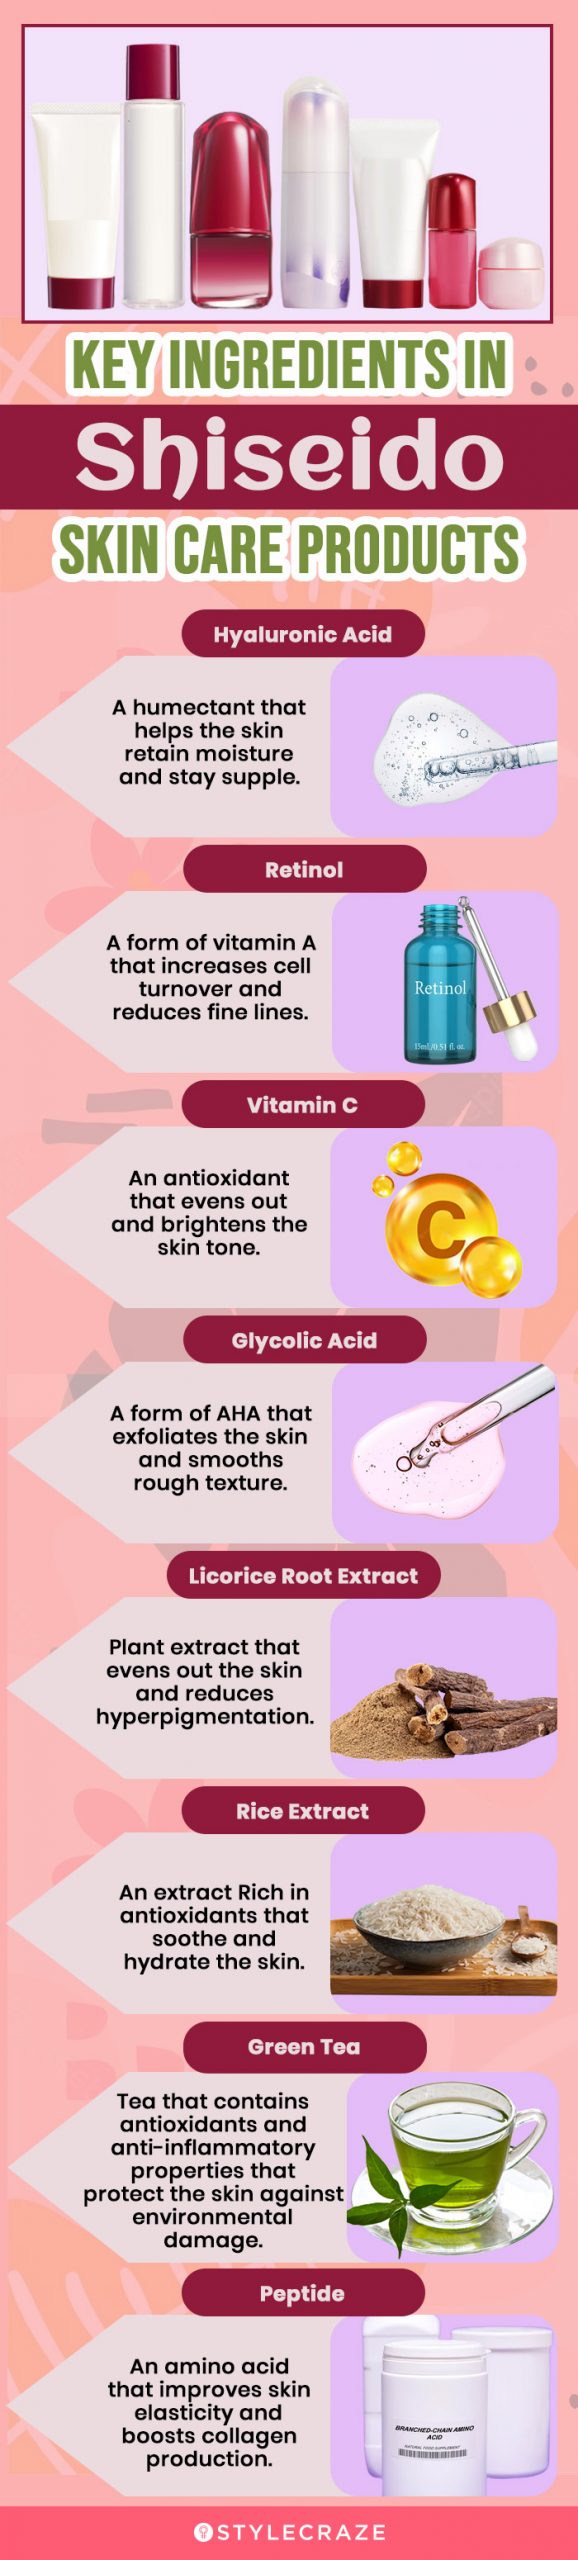  Key Ingredients In Shiseido Skincare Products (infographic)